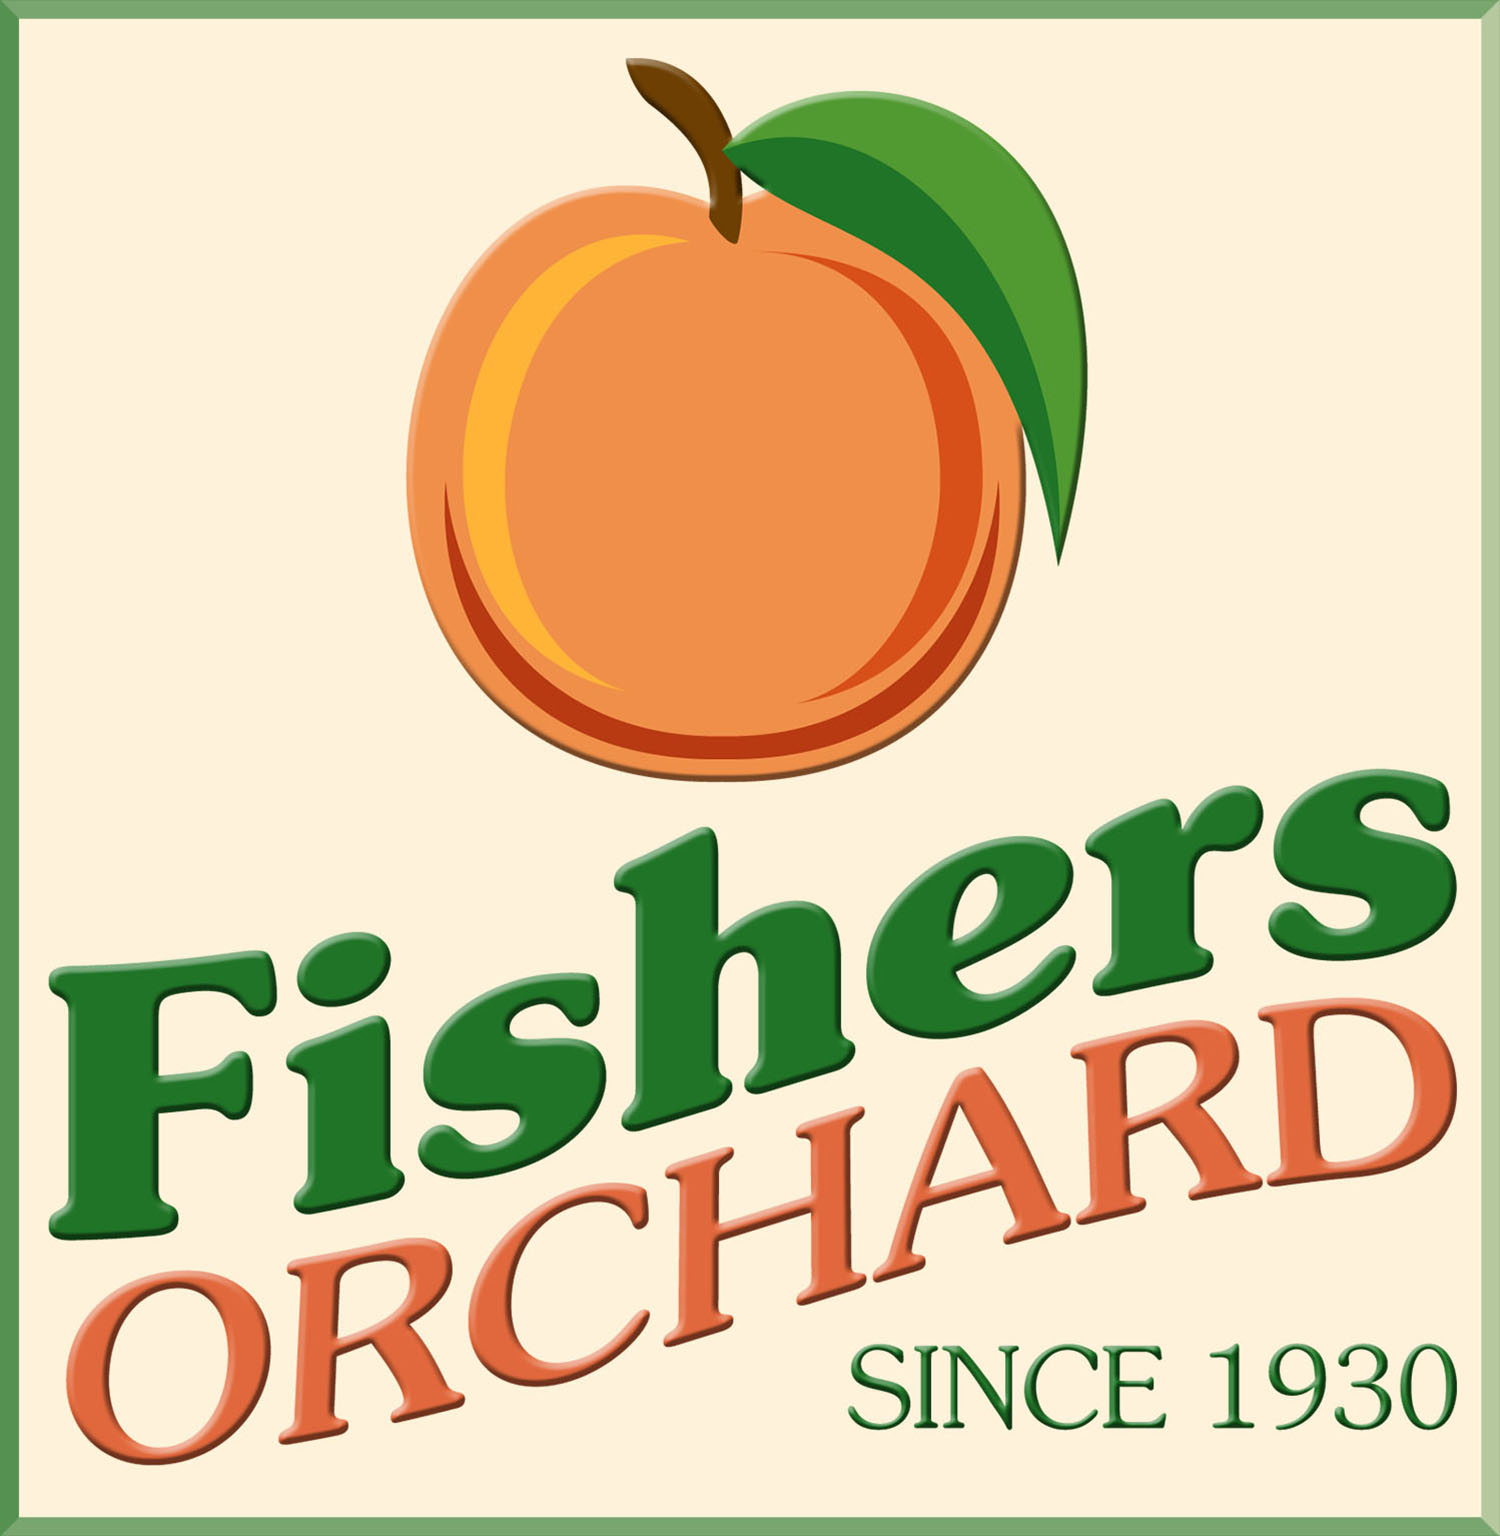 Fishers Orchard